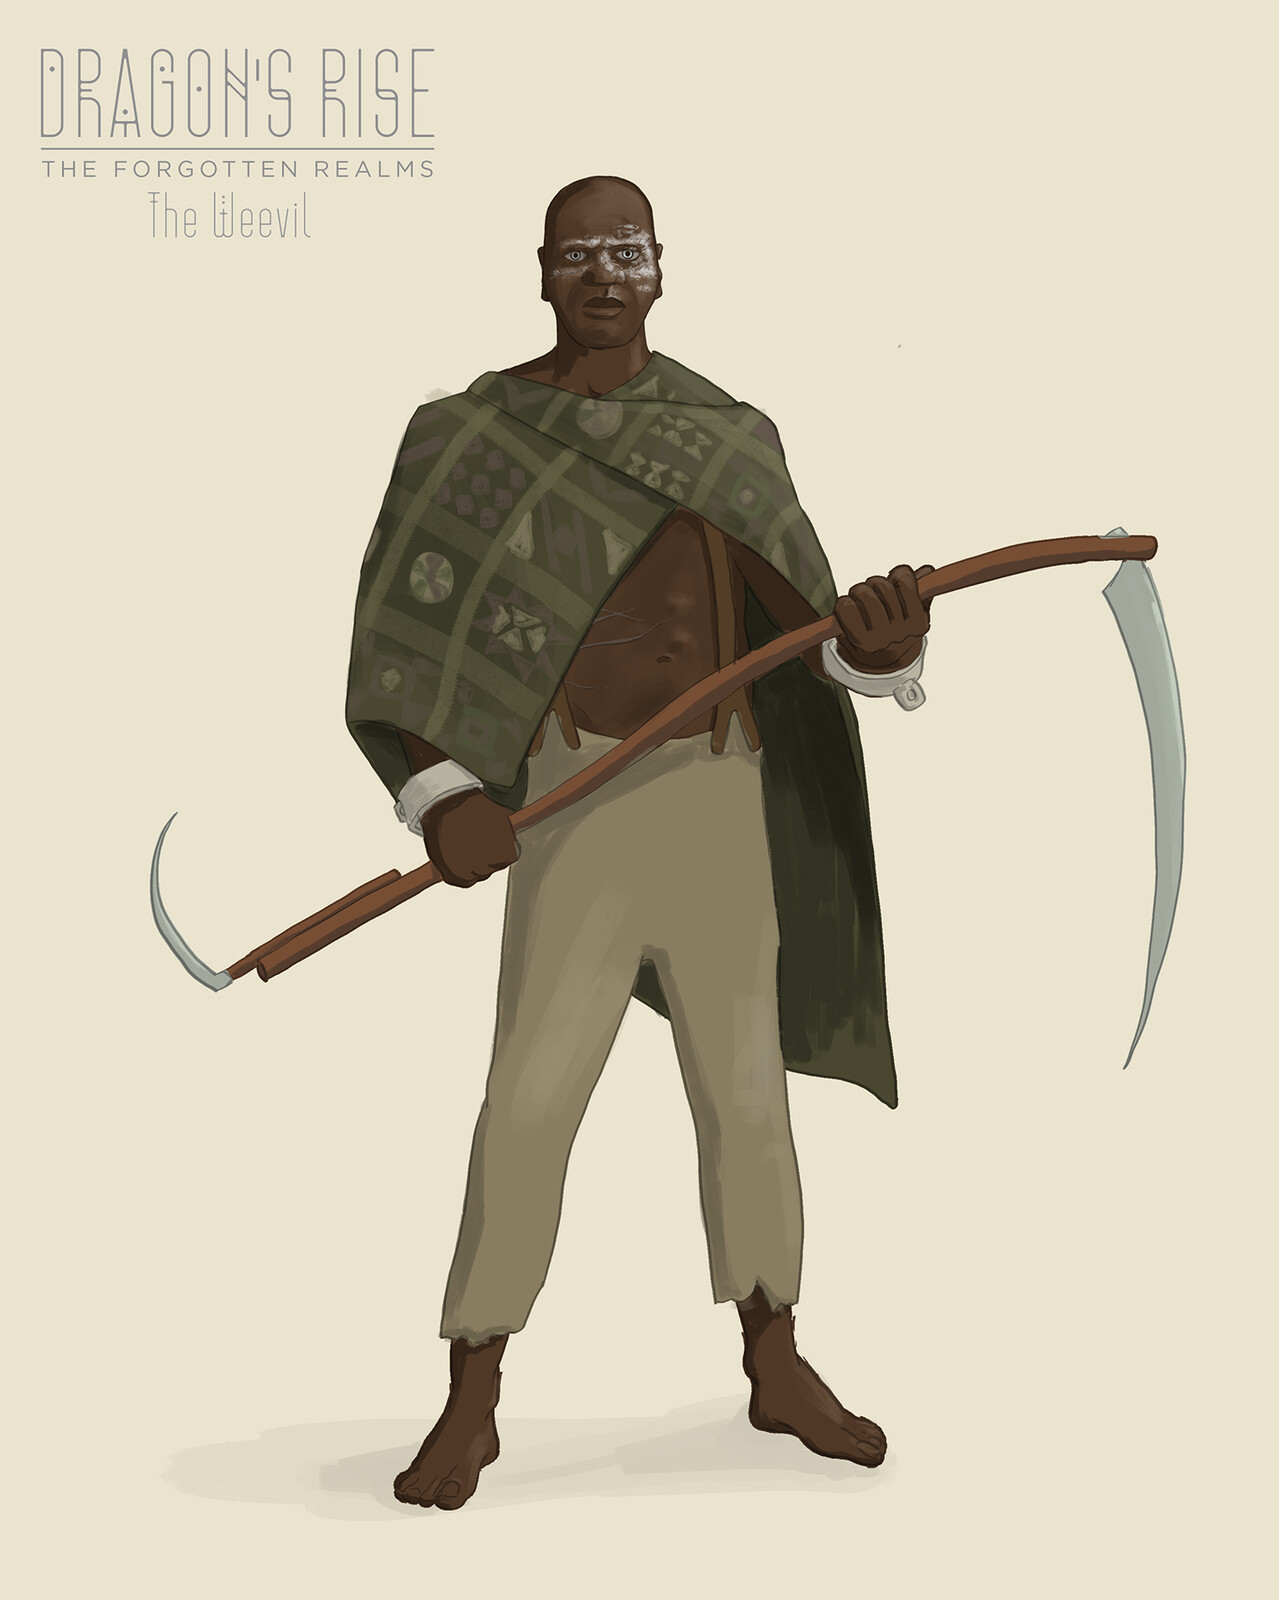 THE WEEVIL - An escaped slave turned vigilante, the hero of our story.